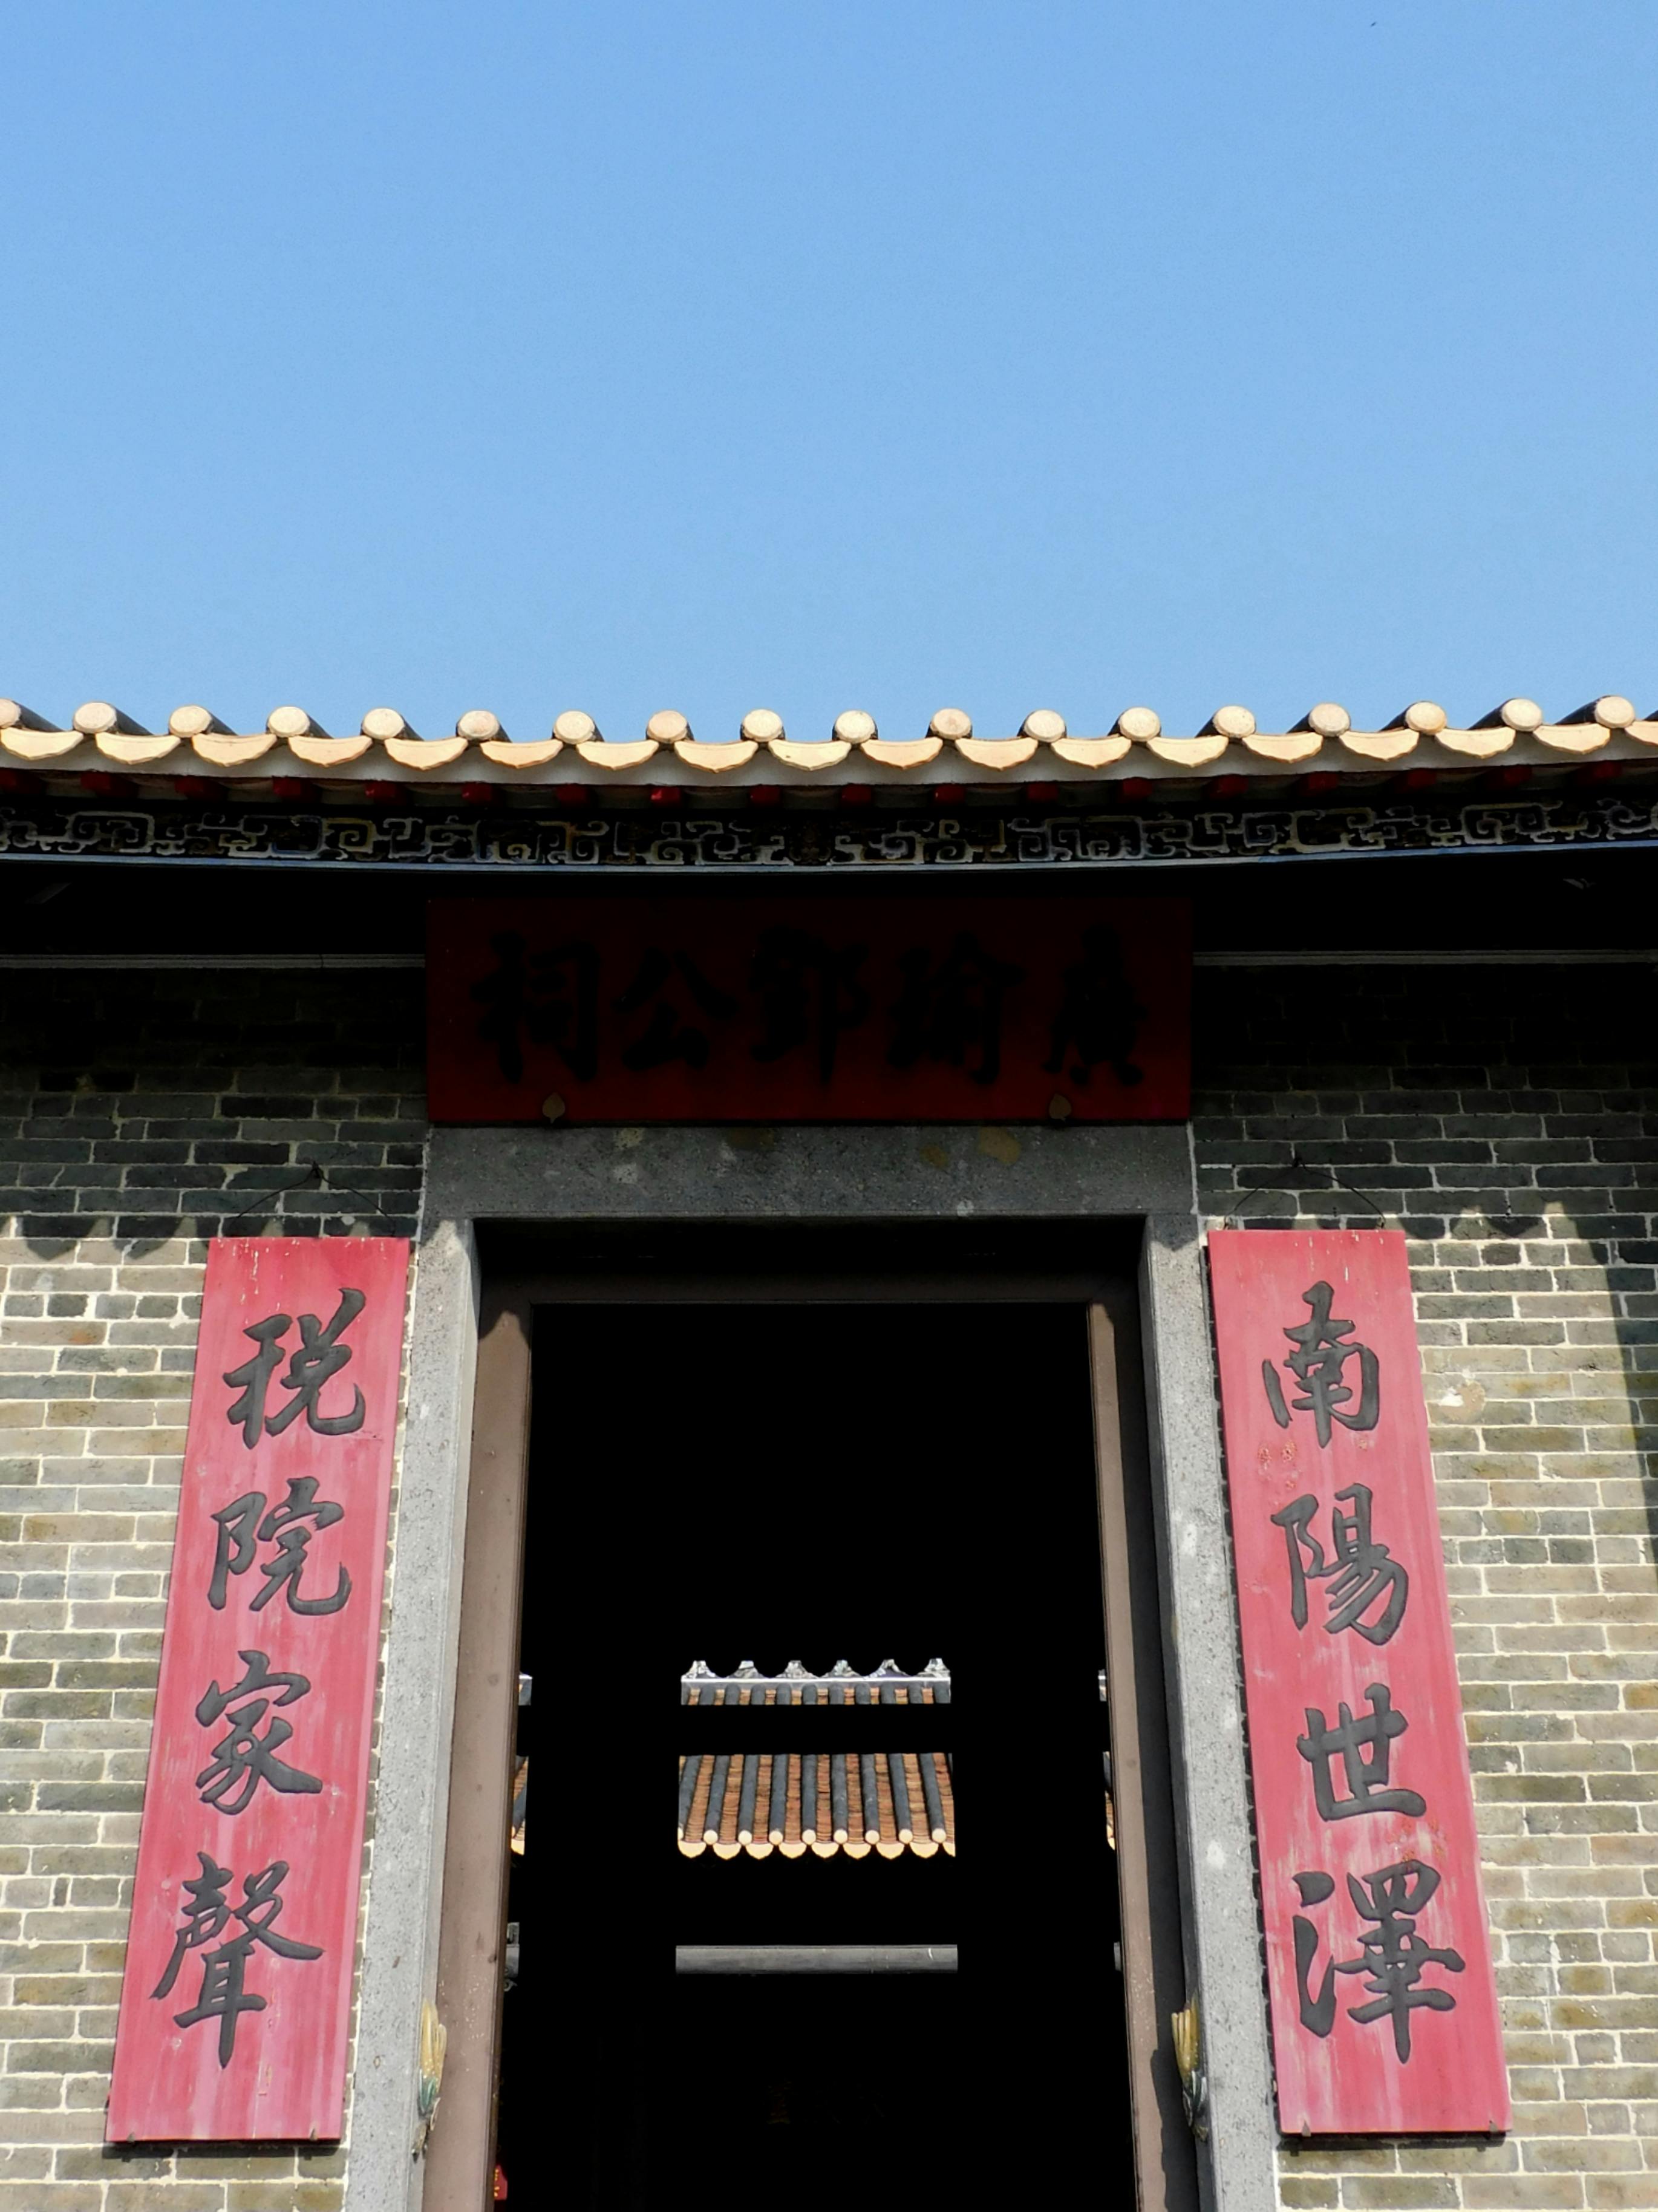 traditional asian house facade with hieroglyphs under cloudless blue sky